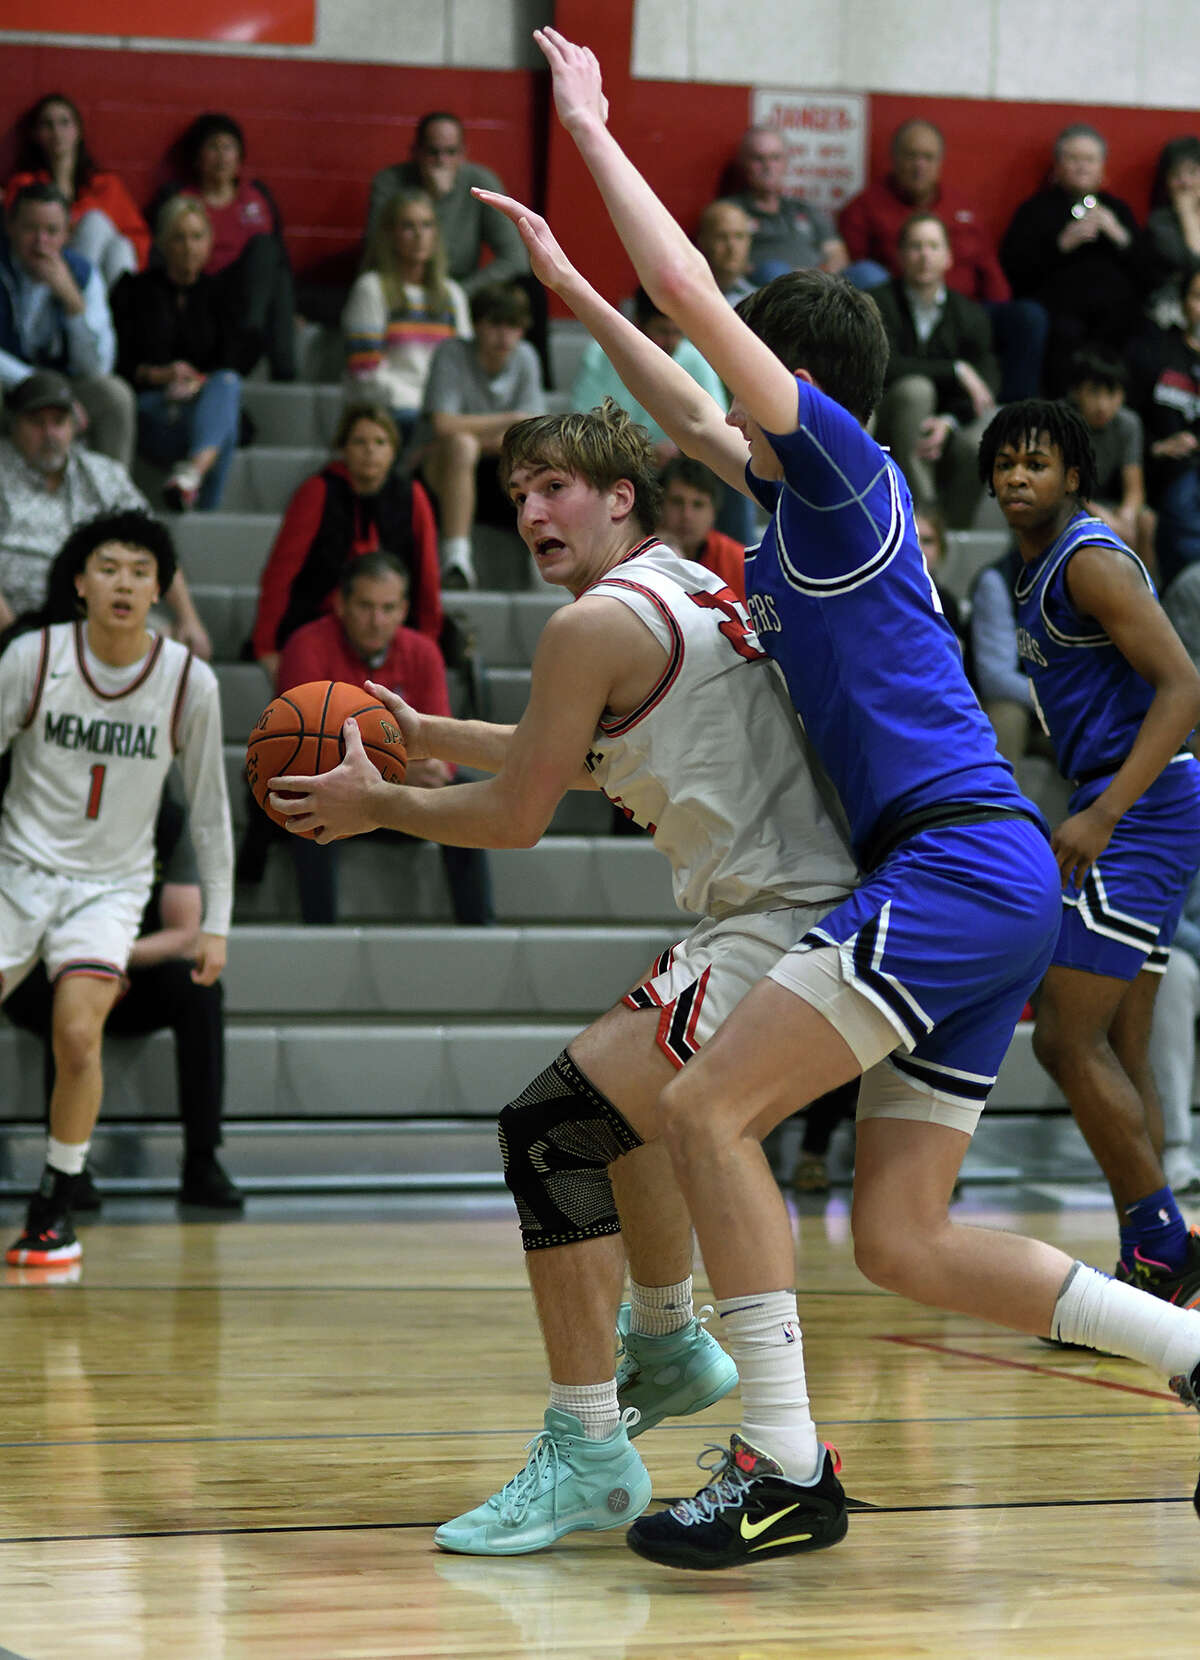 Memorial senior Caleb Sanders, left, feels the defensive pressure from Cy Creek 6'7" senior Noah Martin during aciton in the third quarter of their District 17-6A matchup at Memorial High School on Jan. 18, 2023.